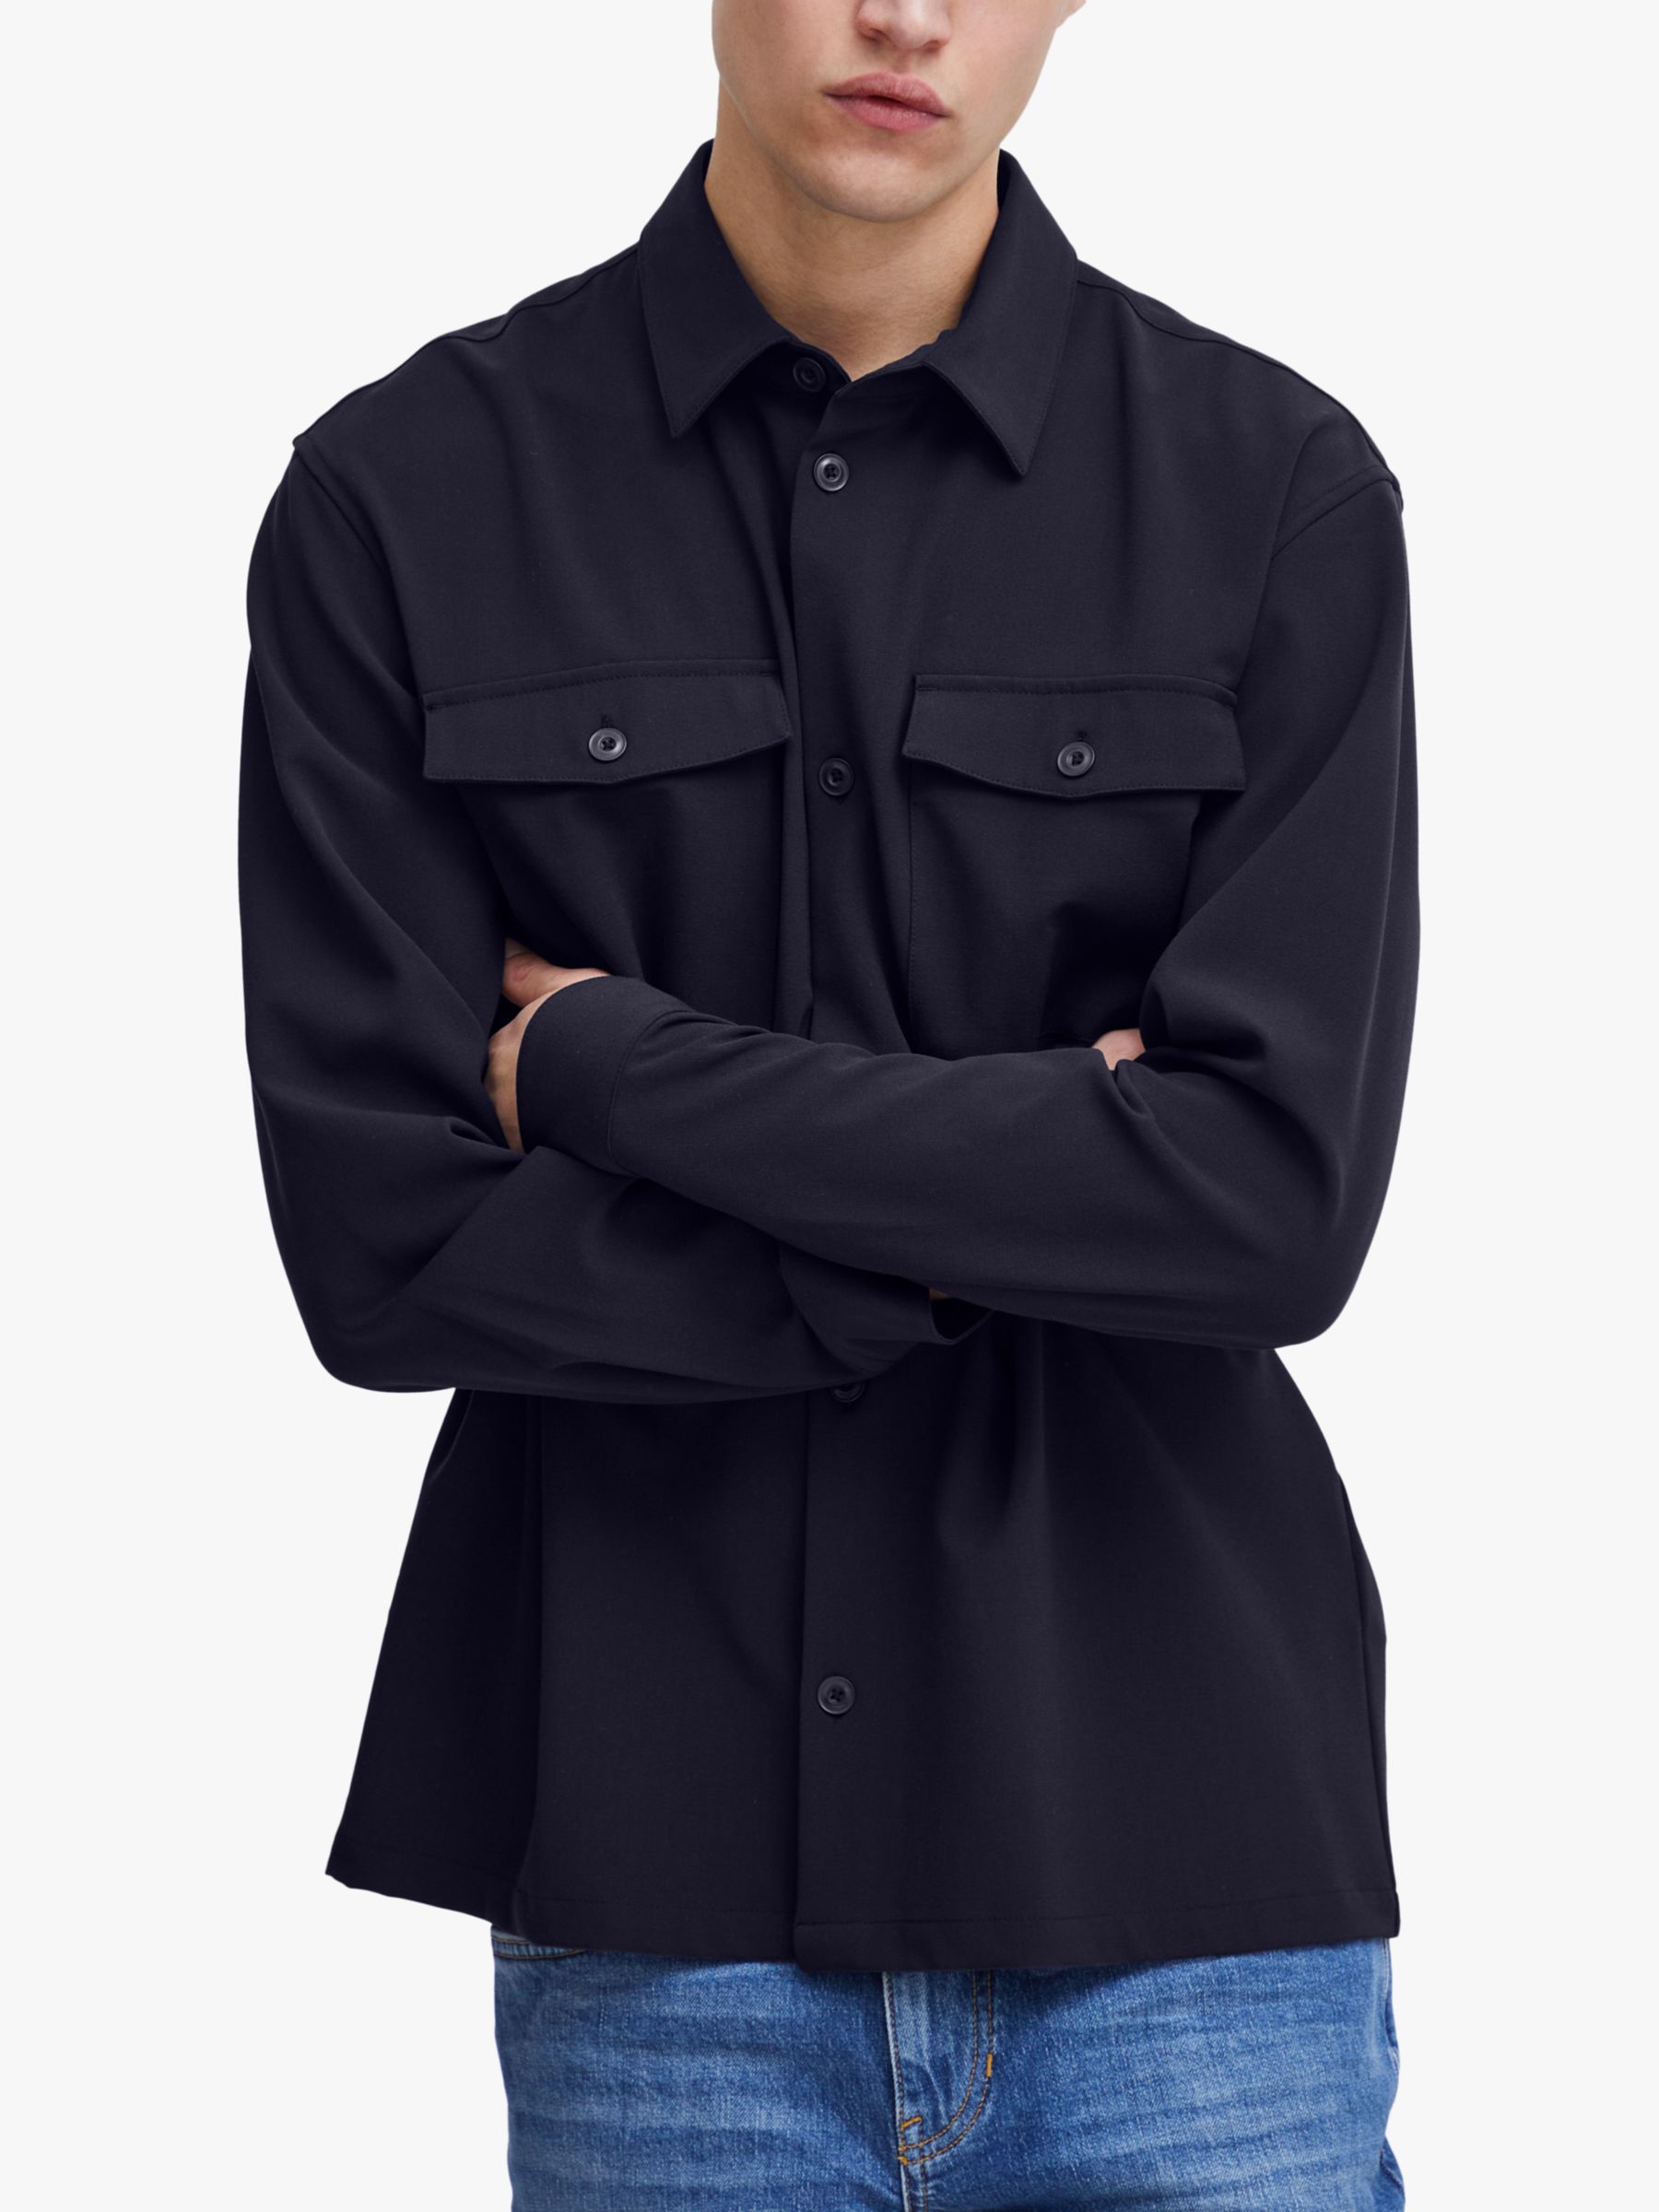 Casual Friday August Stretch Utility Overshirt, Dark Navy, S